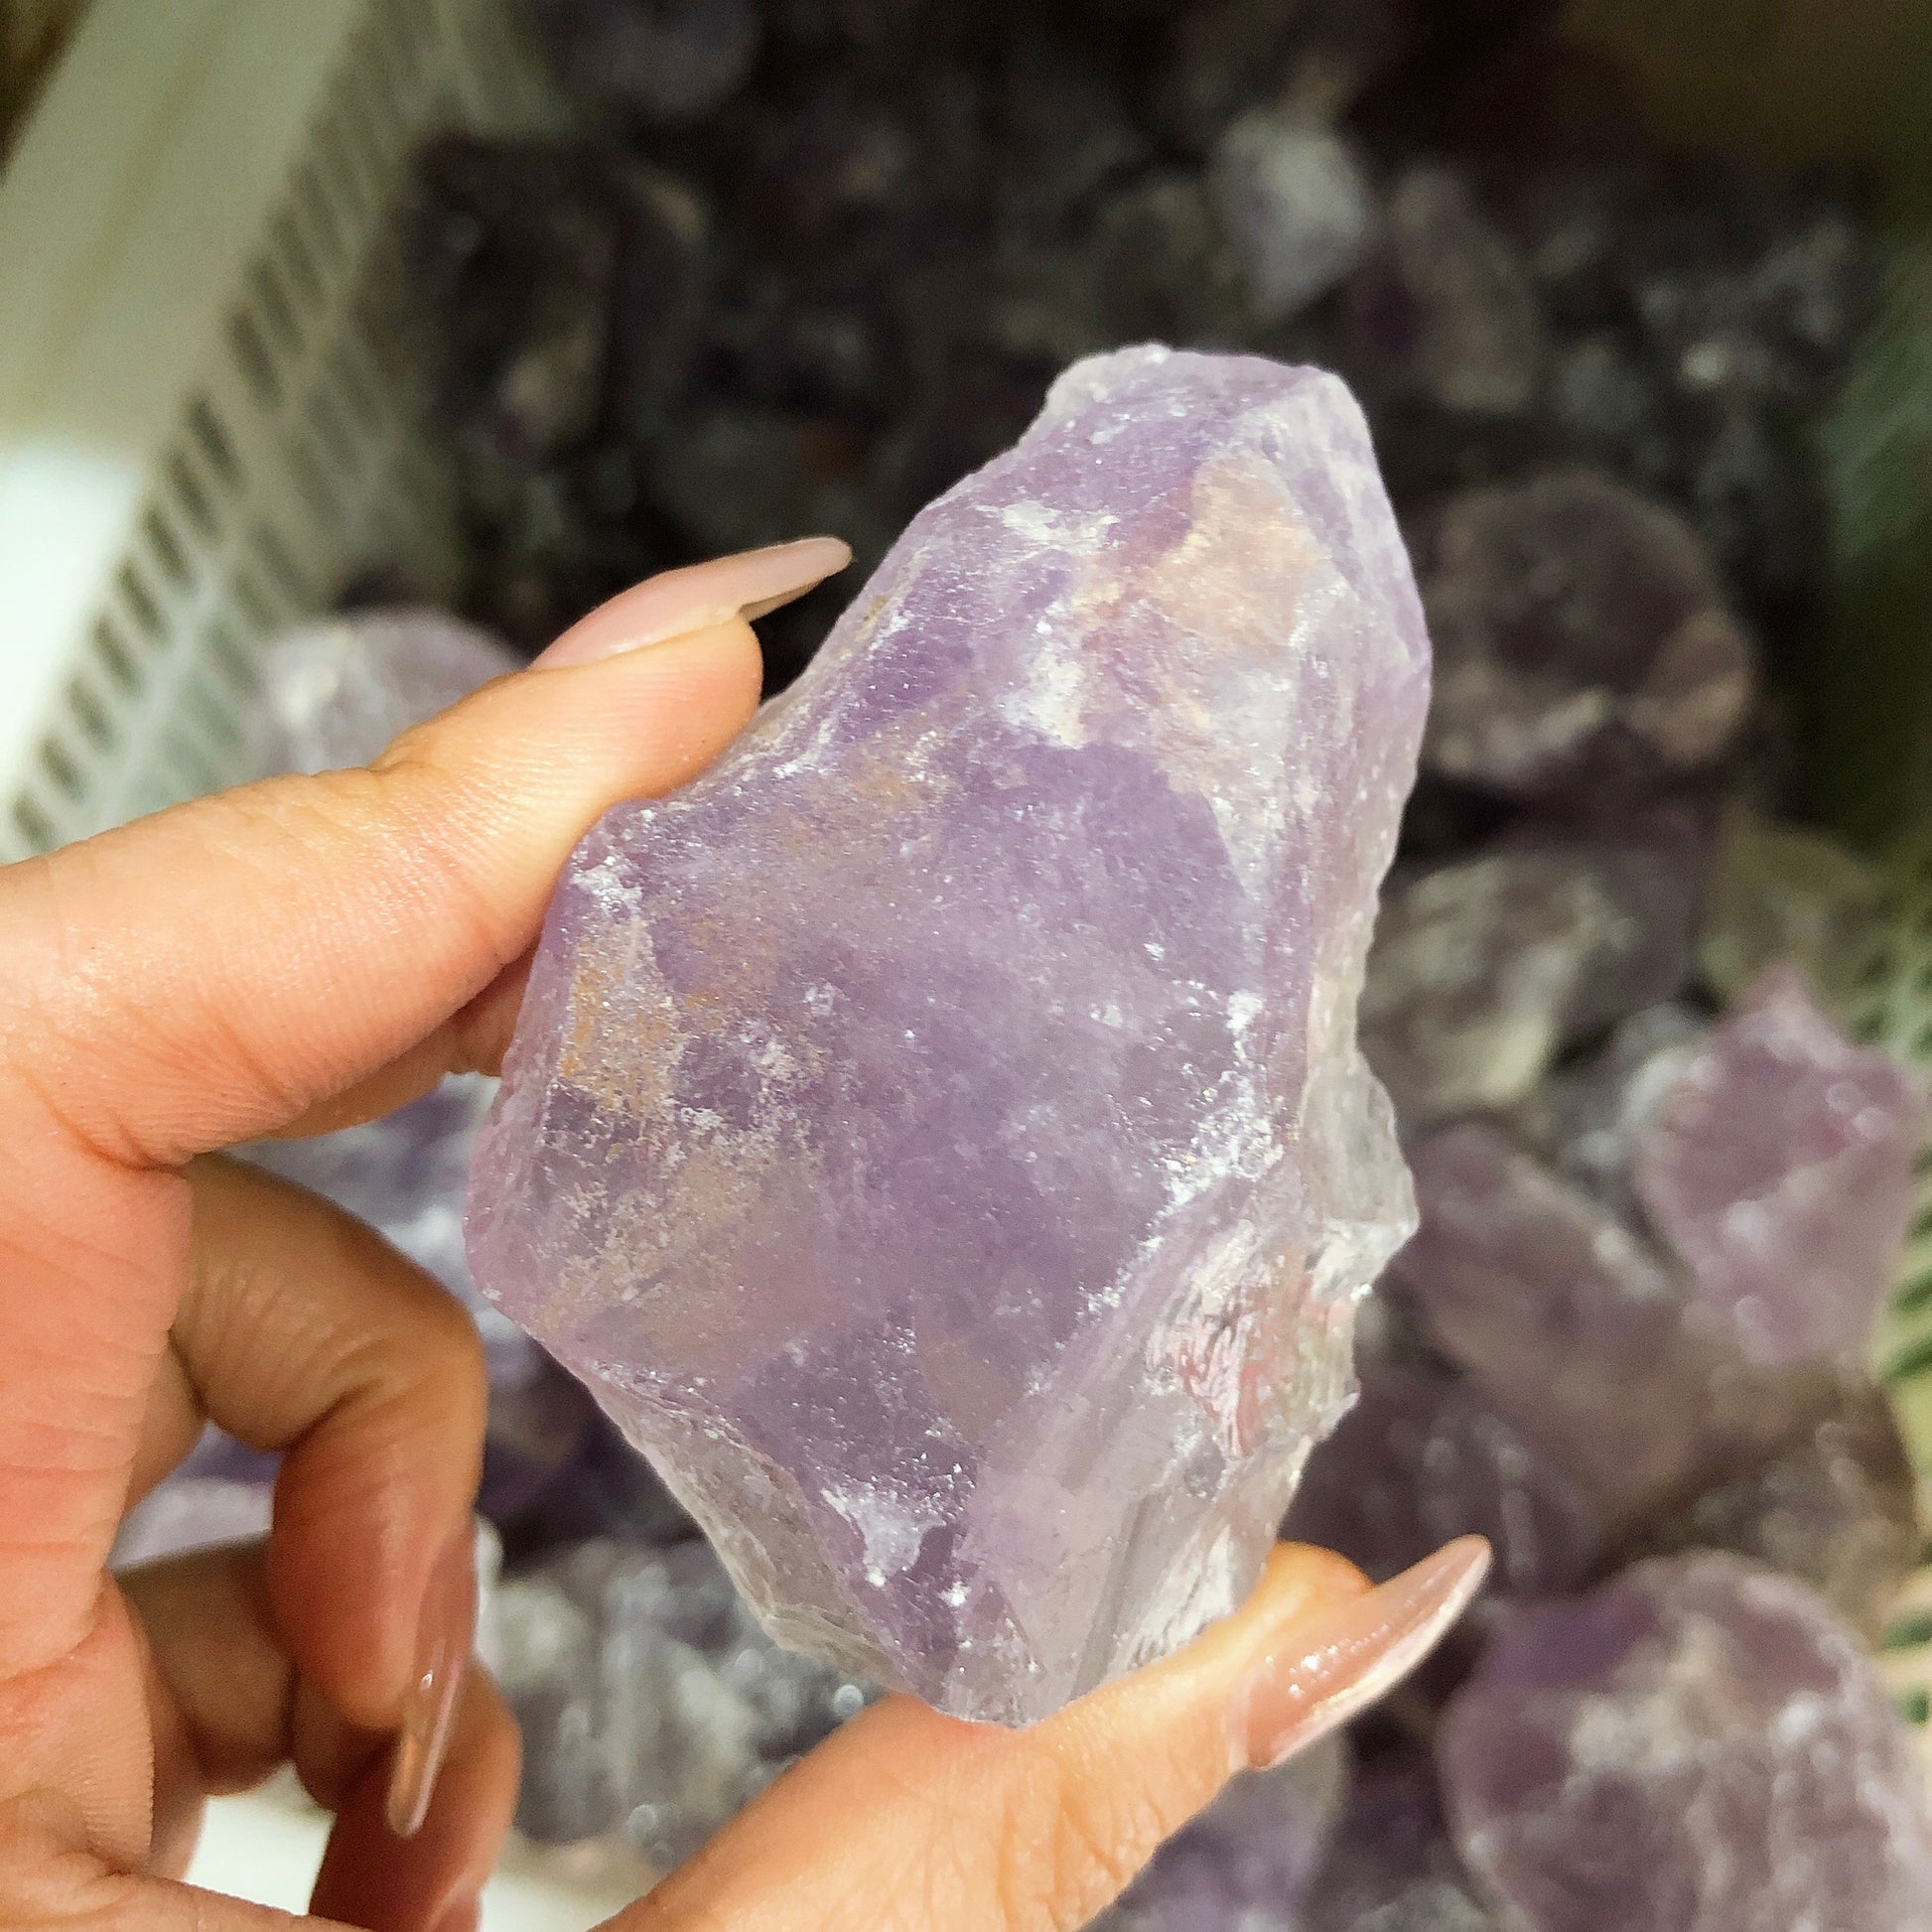 Natural Amethyst Crystal Stone Original Certified - Raw - 2+ Piece